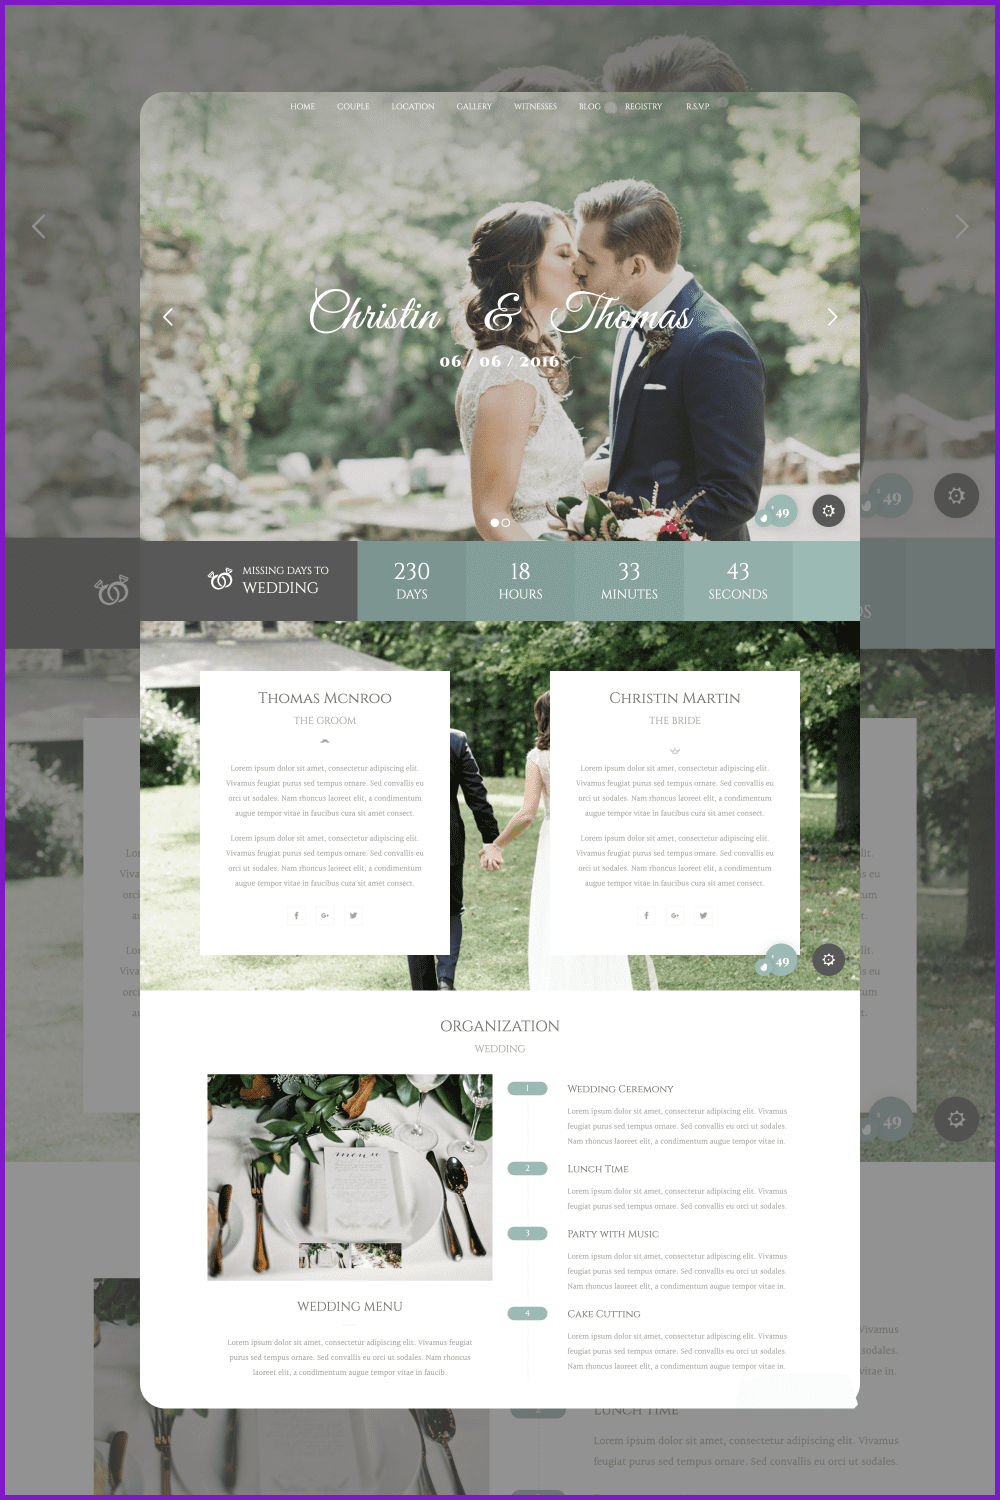 WordPress site page with a photo of the bride and groom on the background of nature.